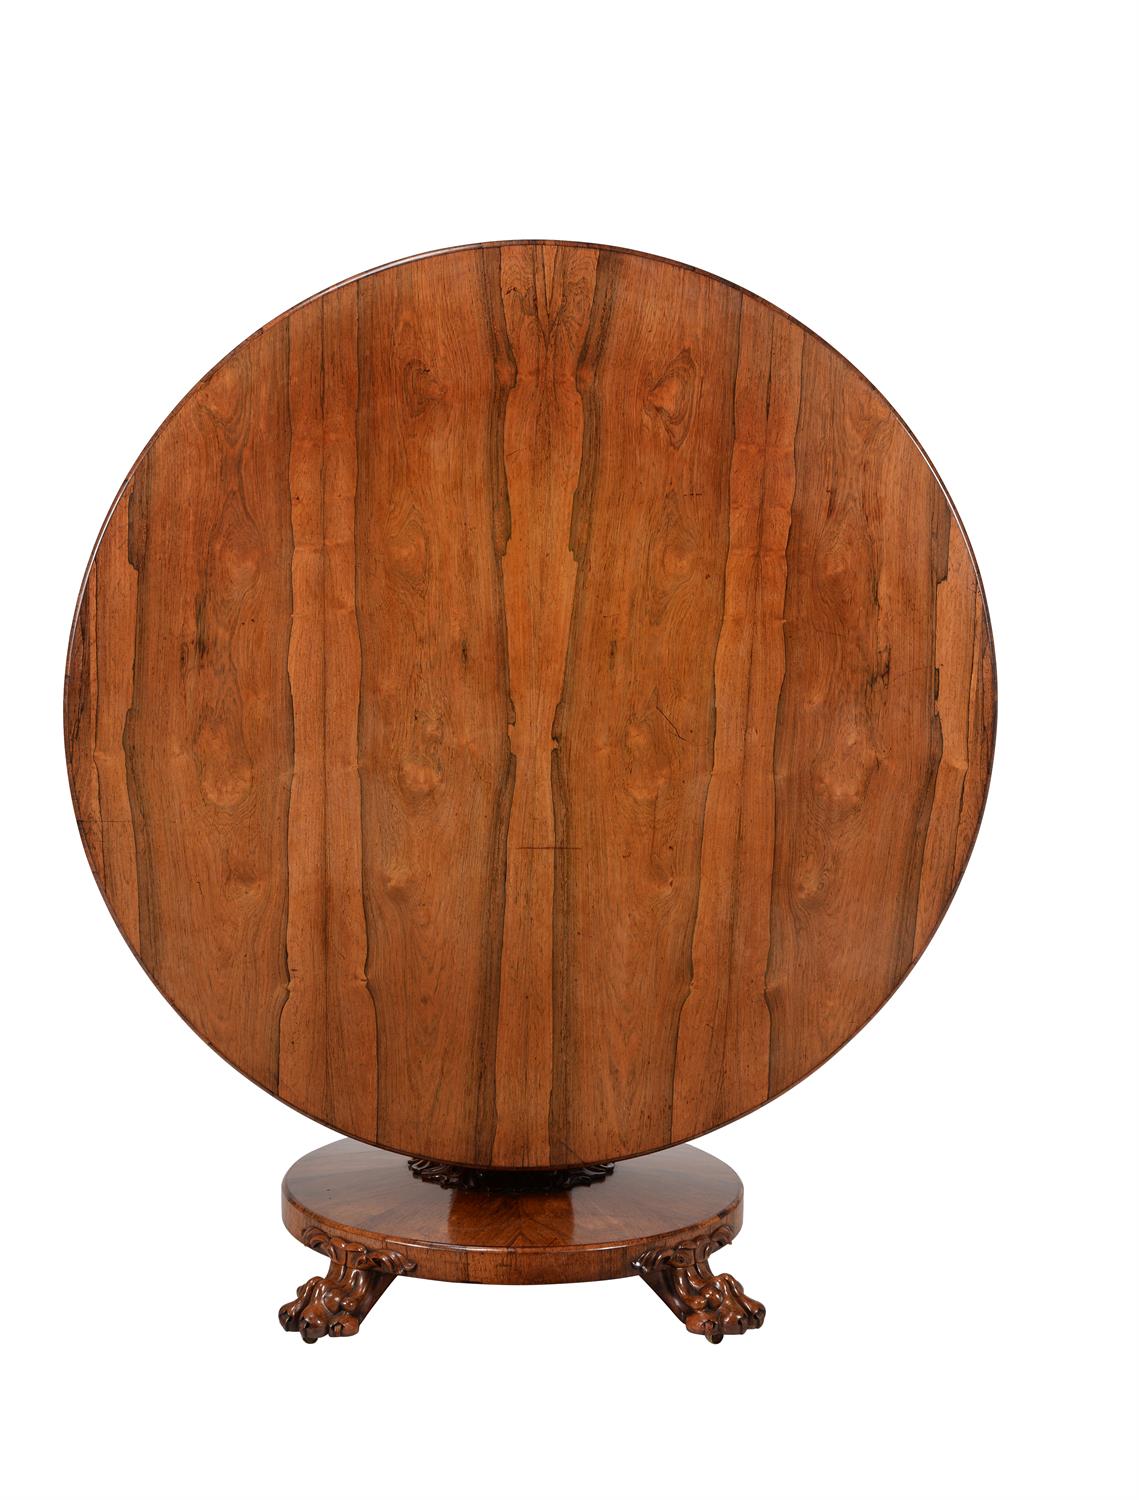 Y A William IV rosewood centre table - Image 2 of 2